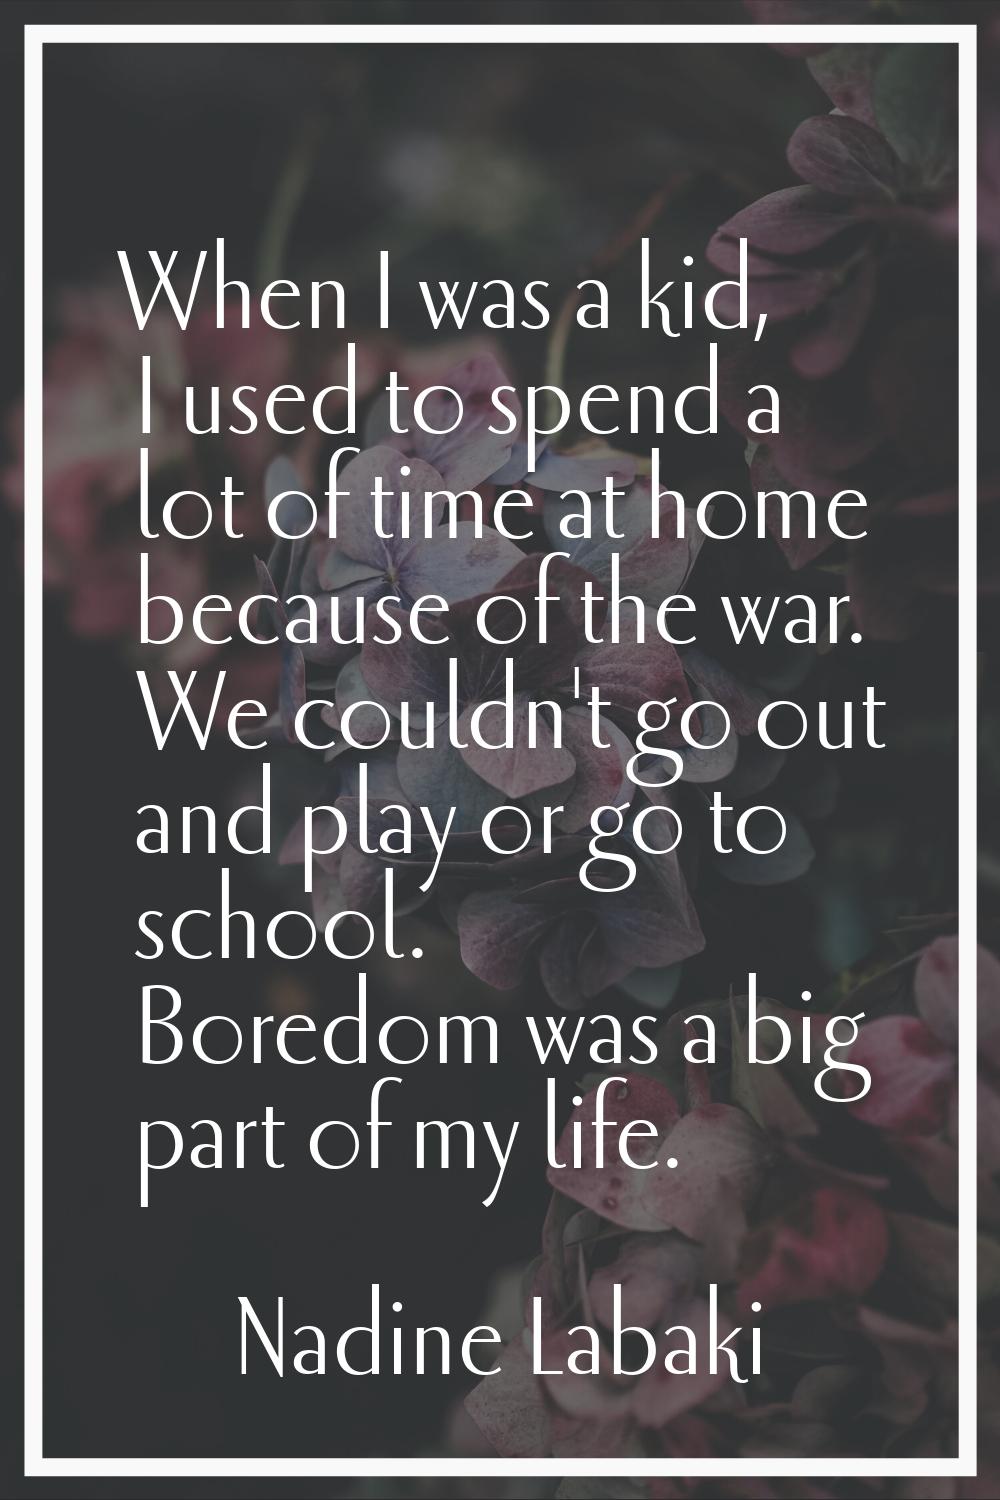 When I was a kid, I used to spend a lot of time at home because of the war. We couldn't go out and 